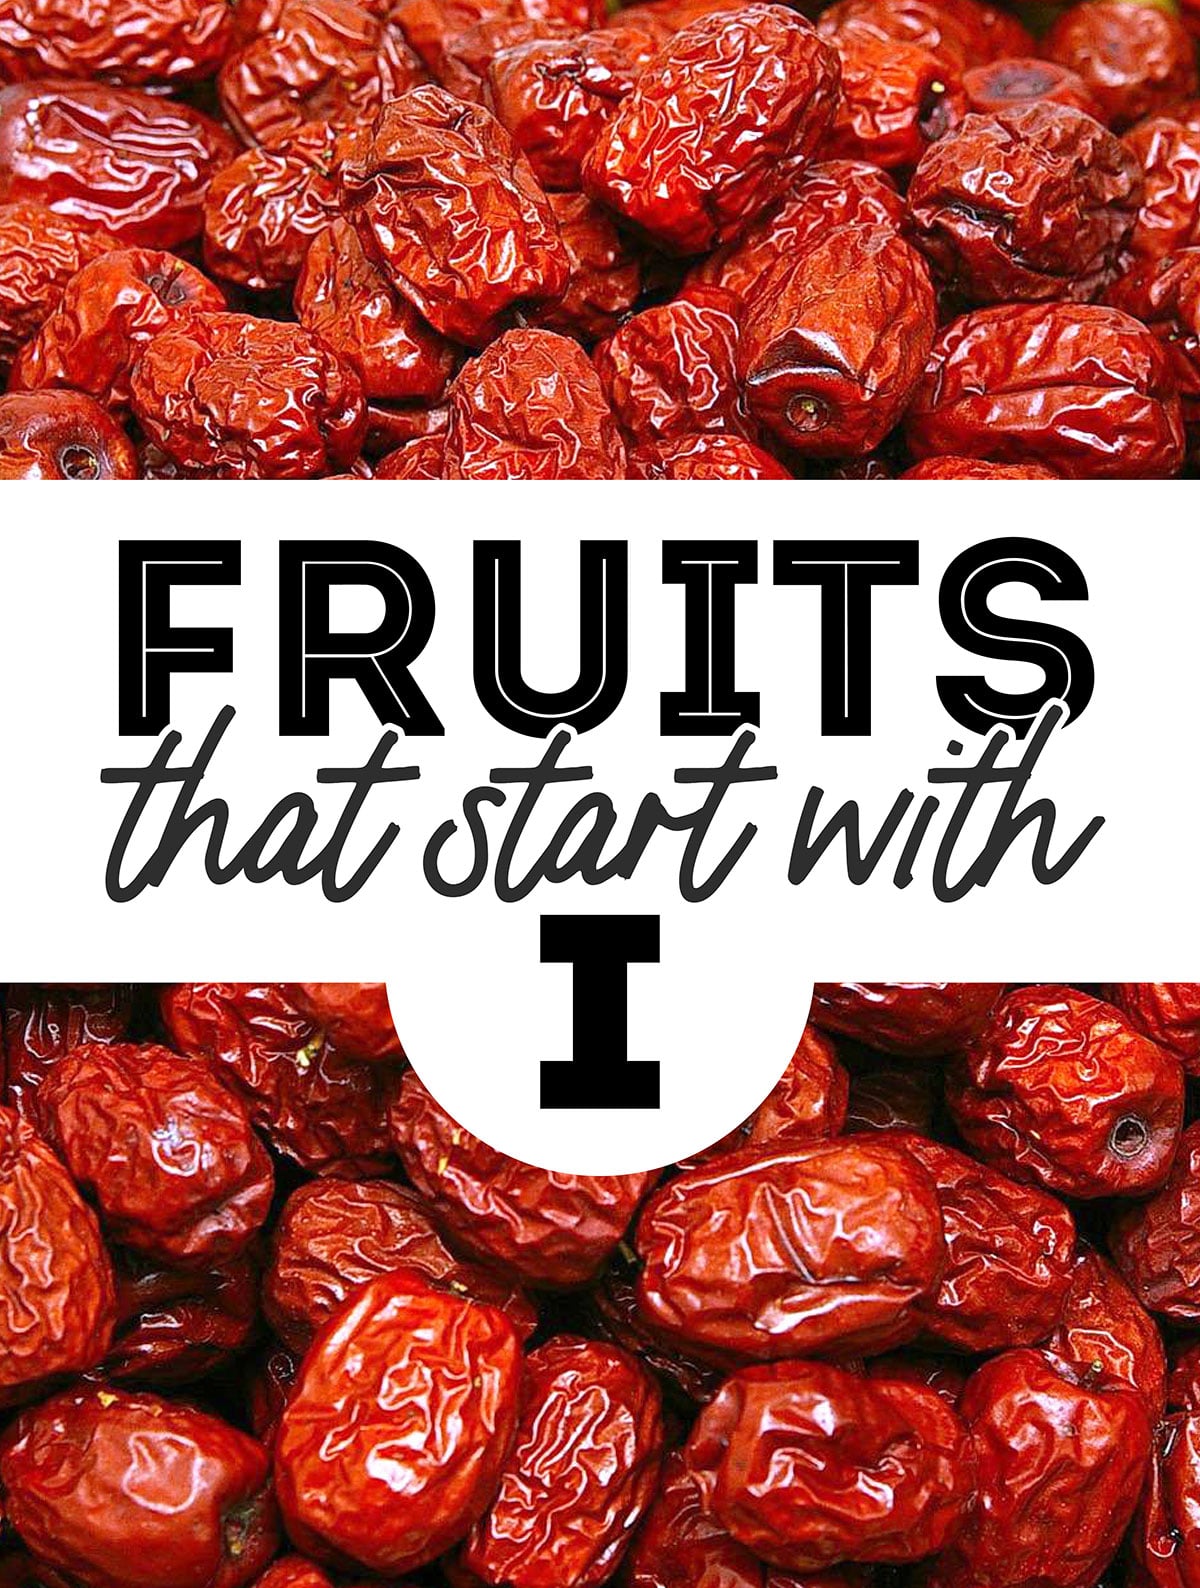 Decorative image that says "fruits that start with i"